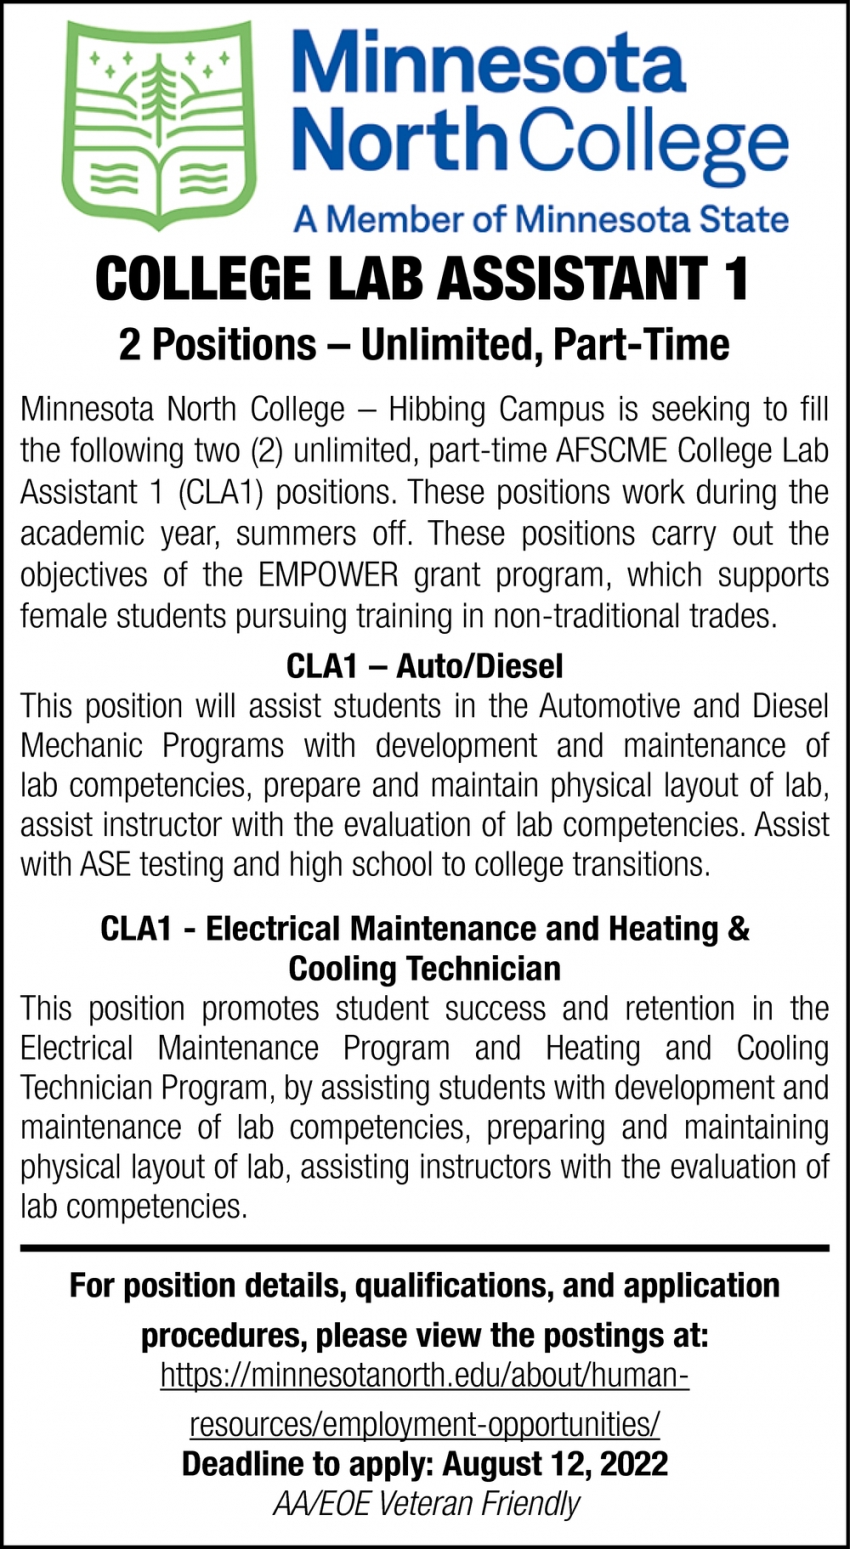 College Lab Assistant, CLA - Auto/Diesel, Electrical Maintenance and Heating & Cooling Technician